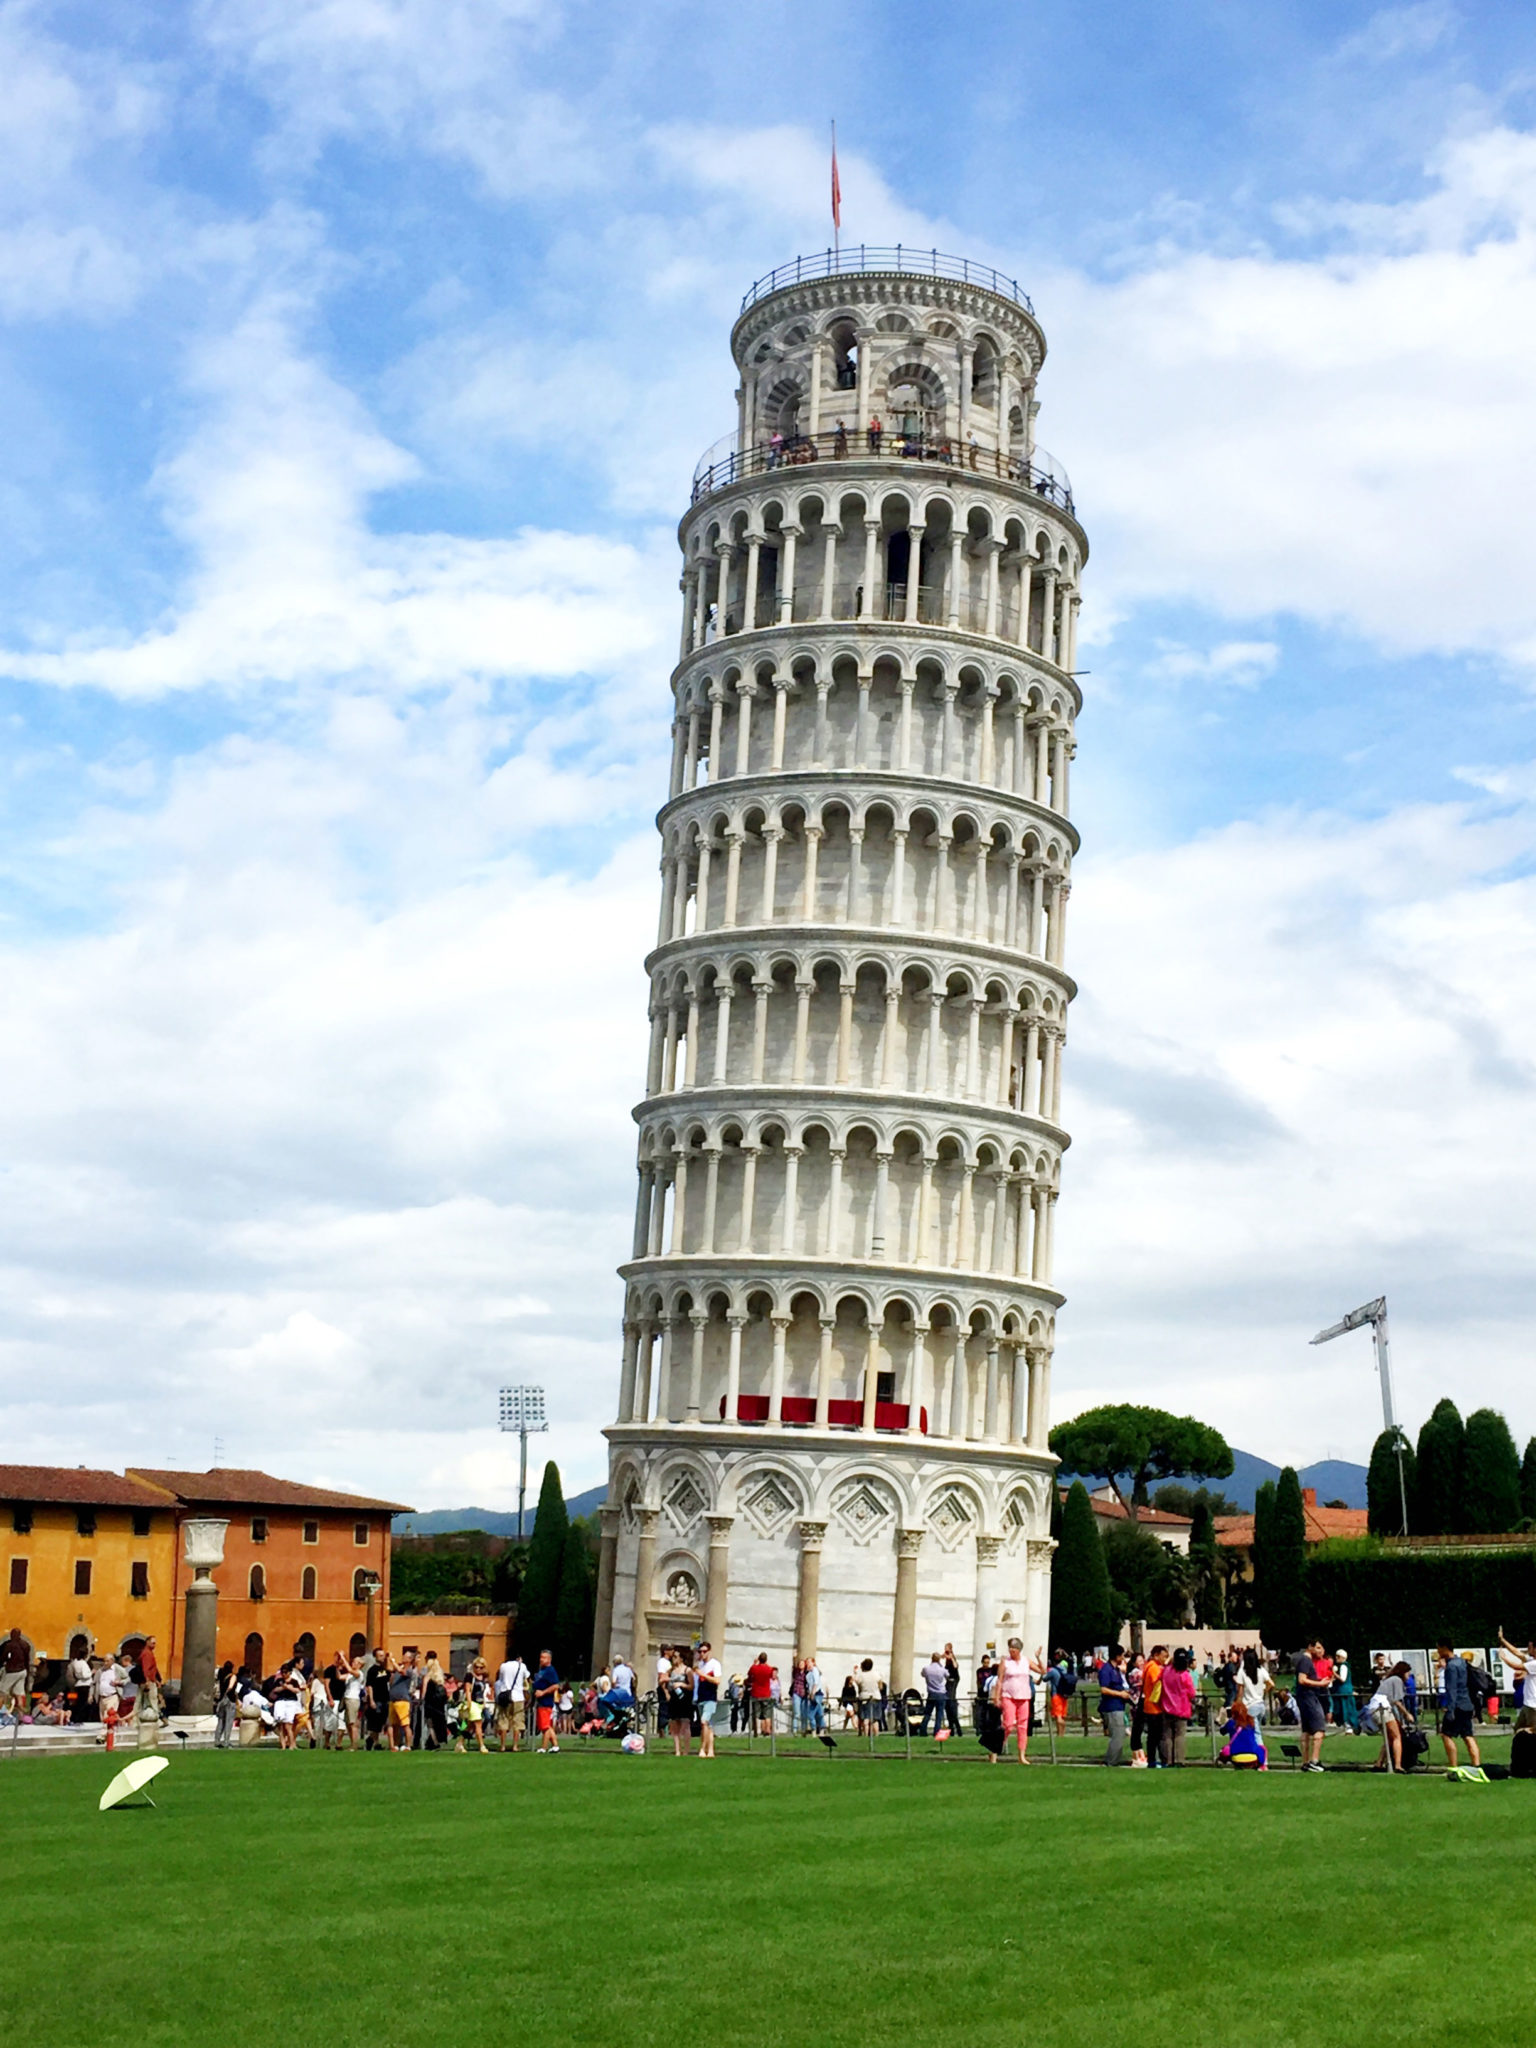 5 THINGS PEOPLE DON'T TELL YOU ABOUT VISITING THE LEANING TOWER OF ...